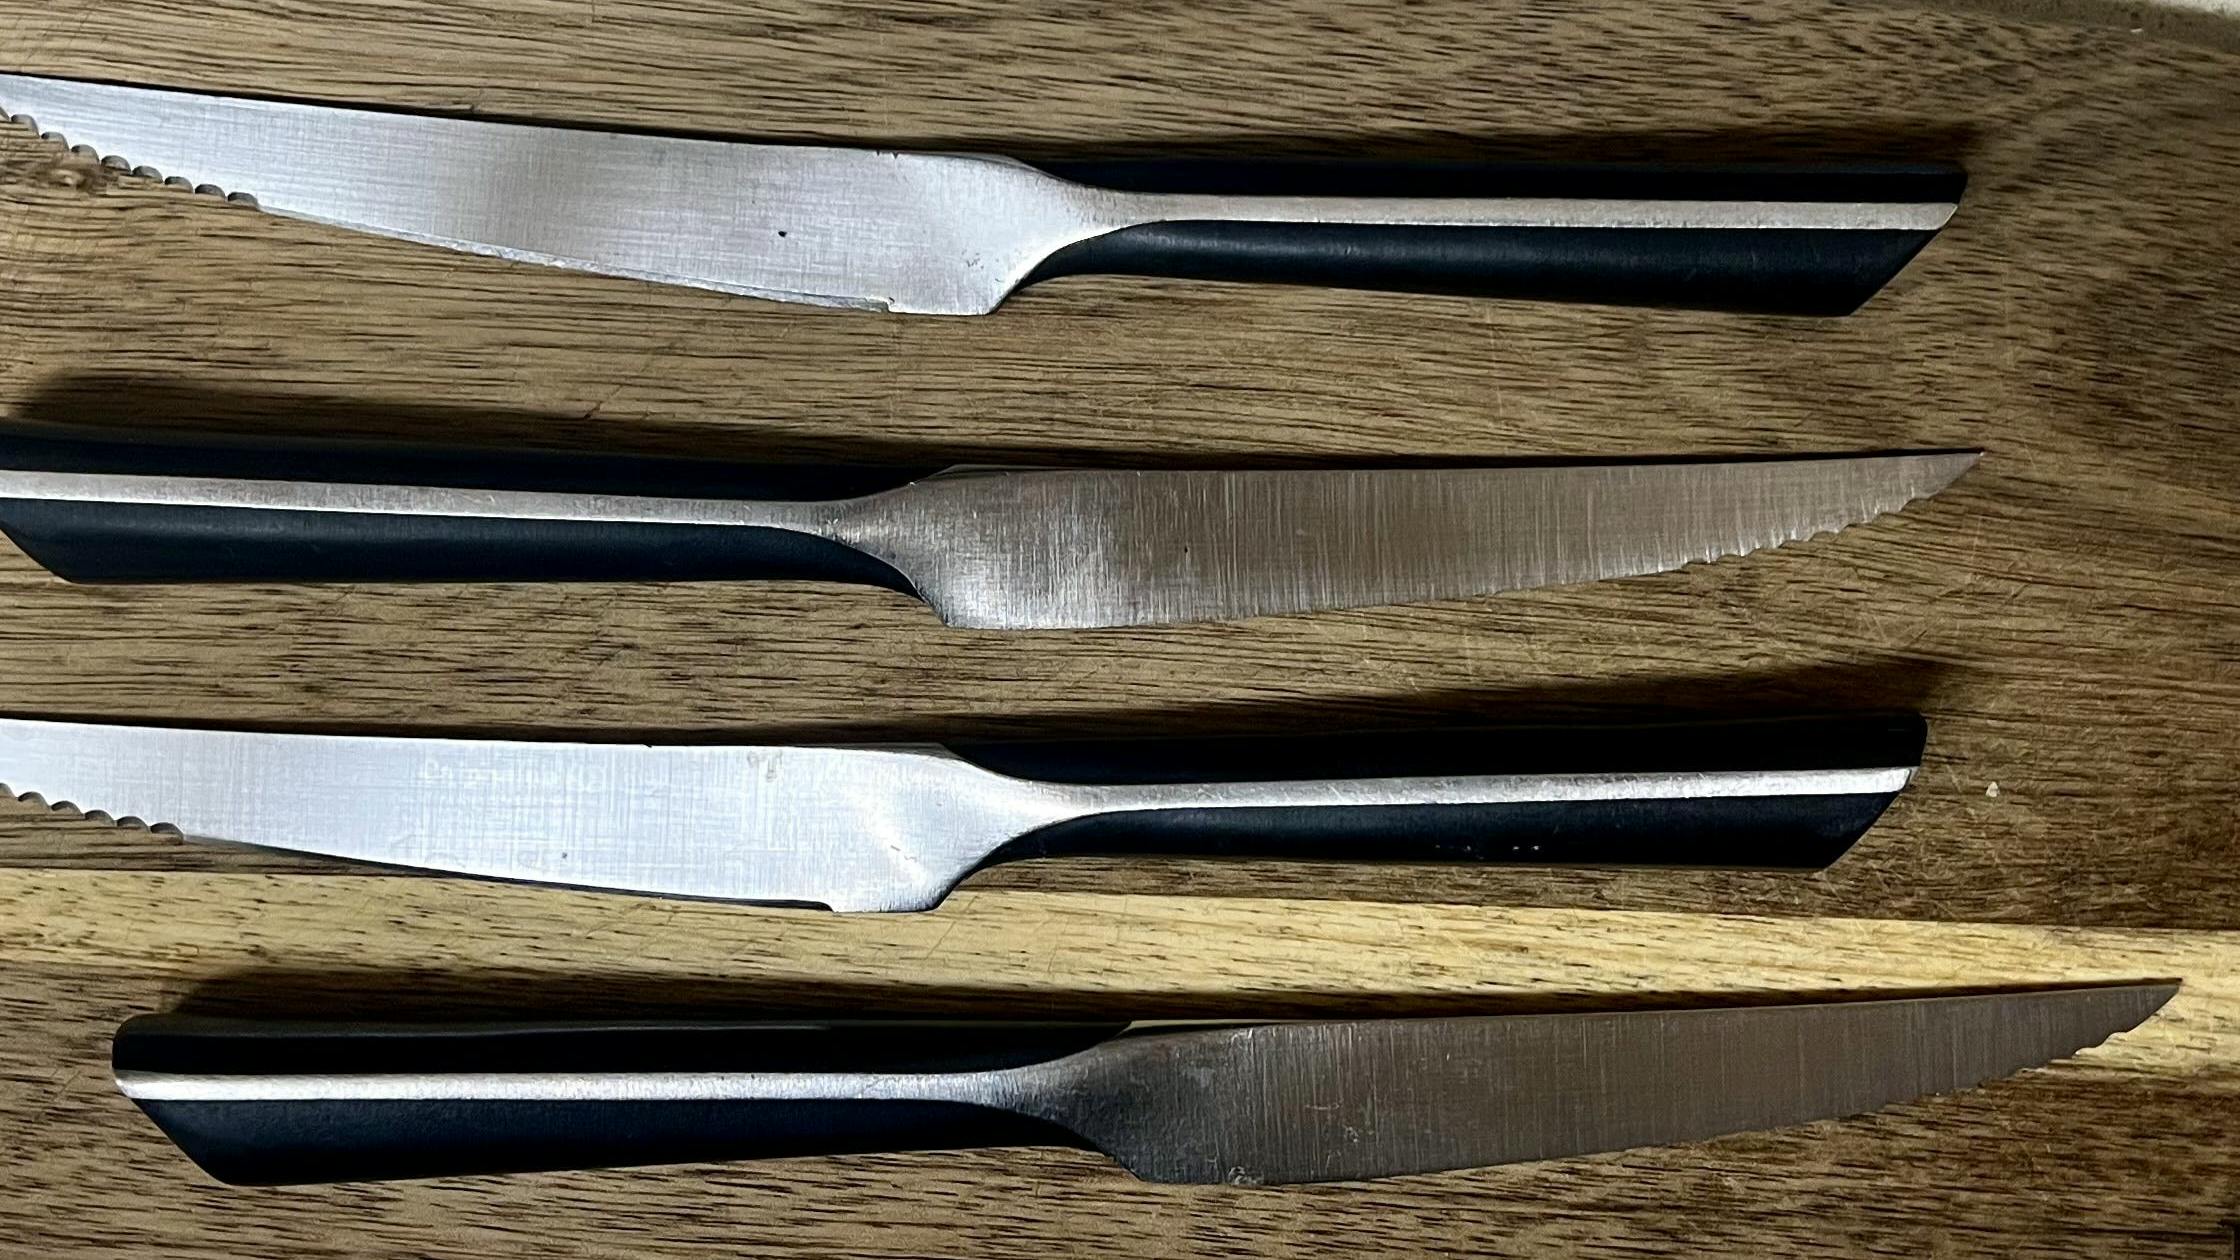 A set of four steak knives with partially serrated blades.